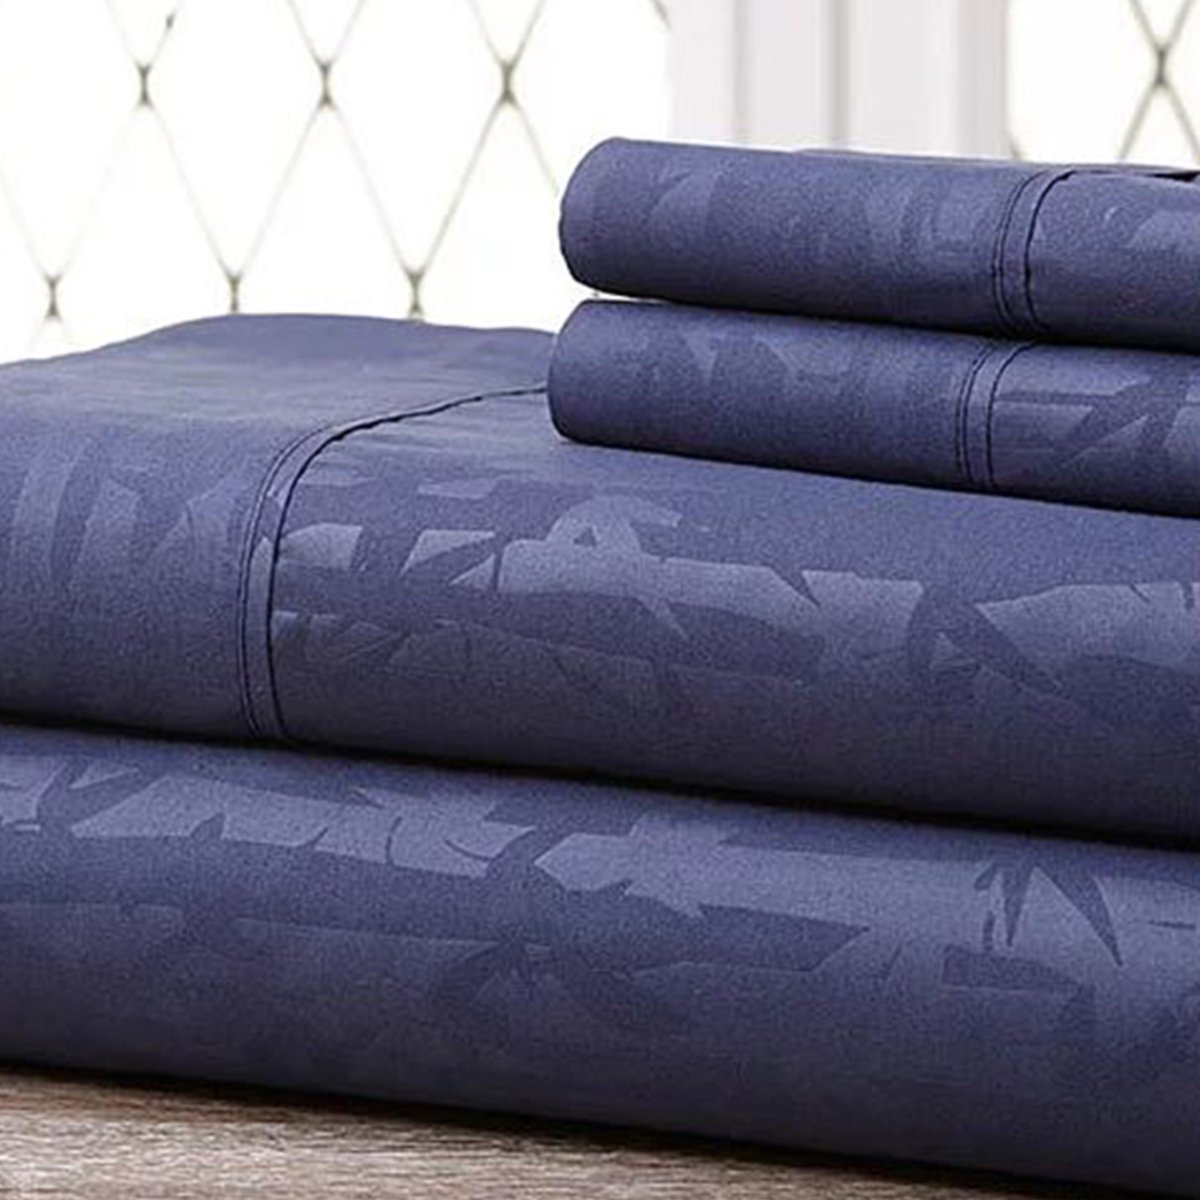 Hny-4pc-eb-nav-q Super-soft 1600 Series Bamboo Embossed Bed Sheet, Navy - Queen, 4 Piece